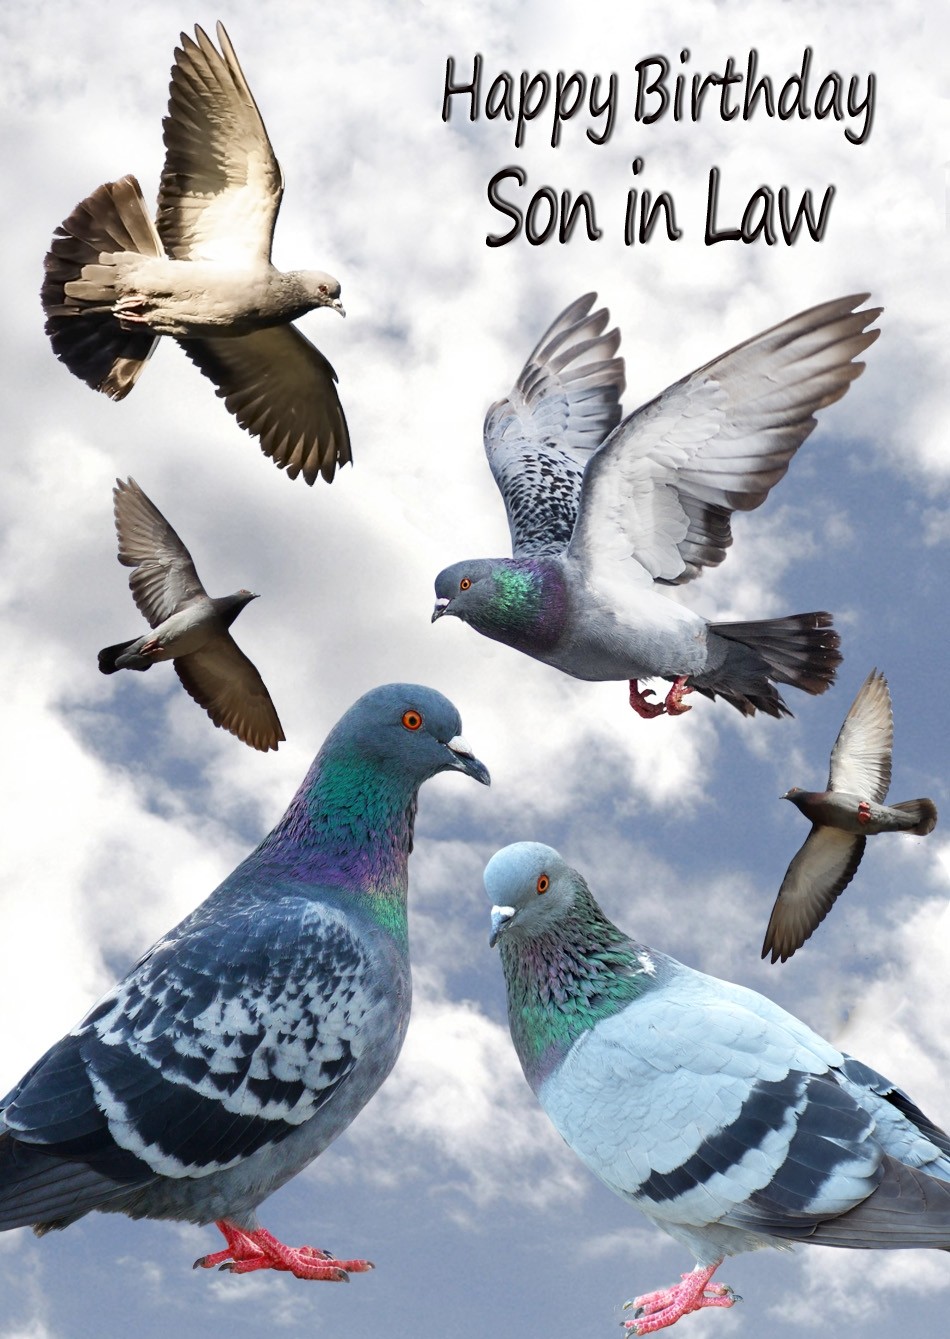 Racing Homing Pigeon Son in Law Birthday Card